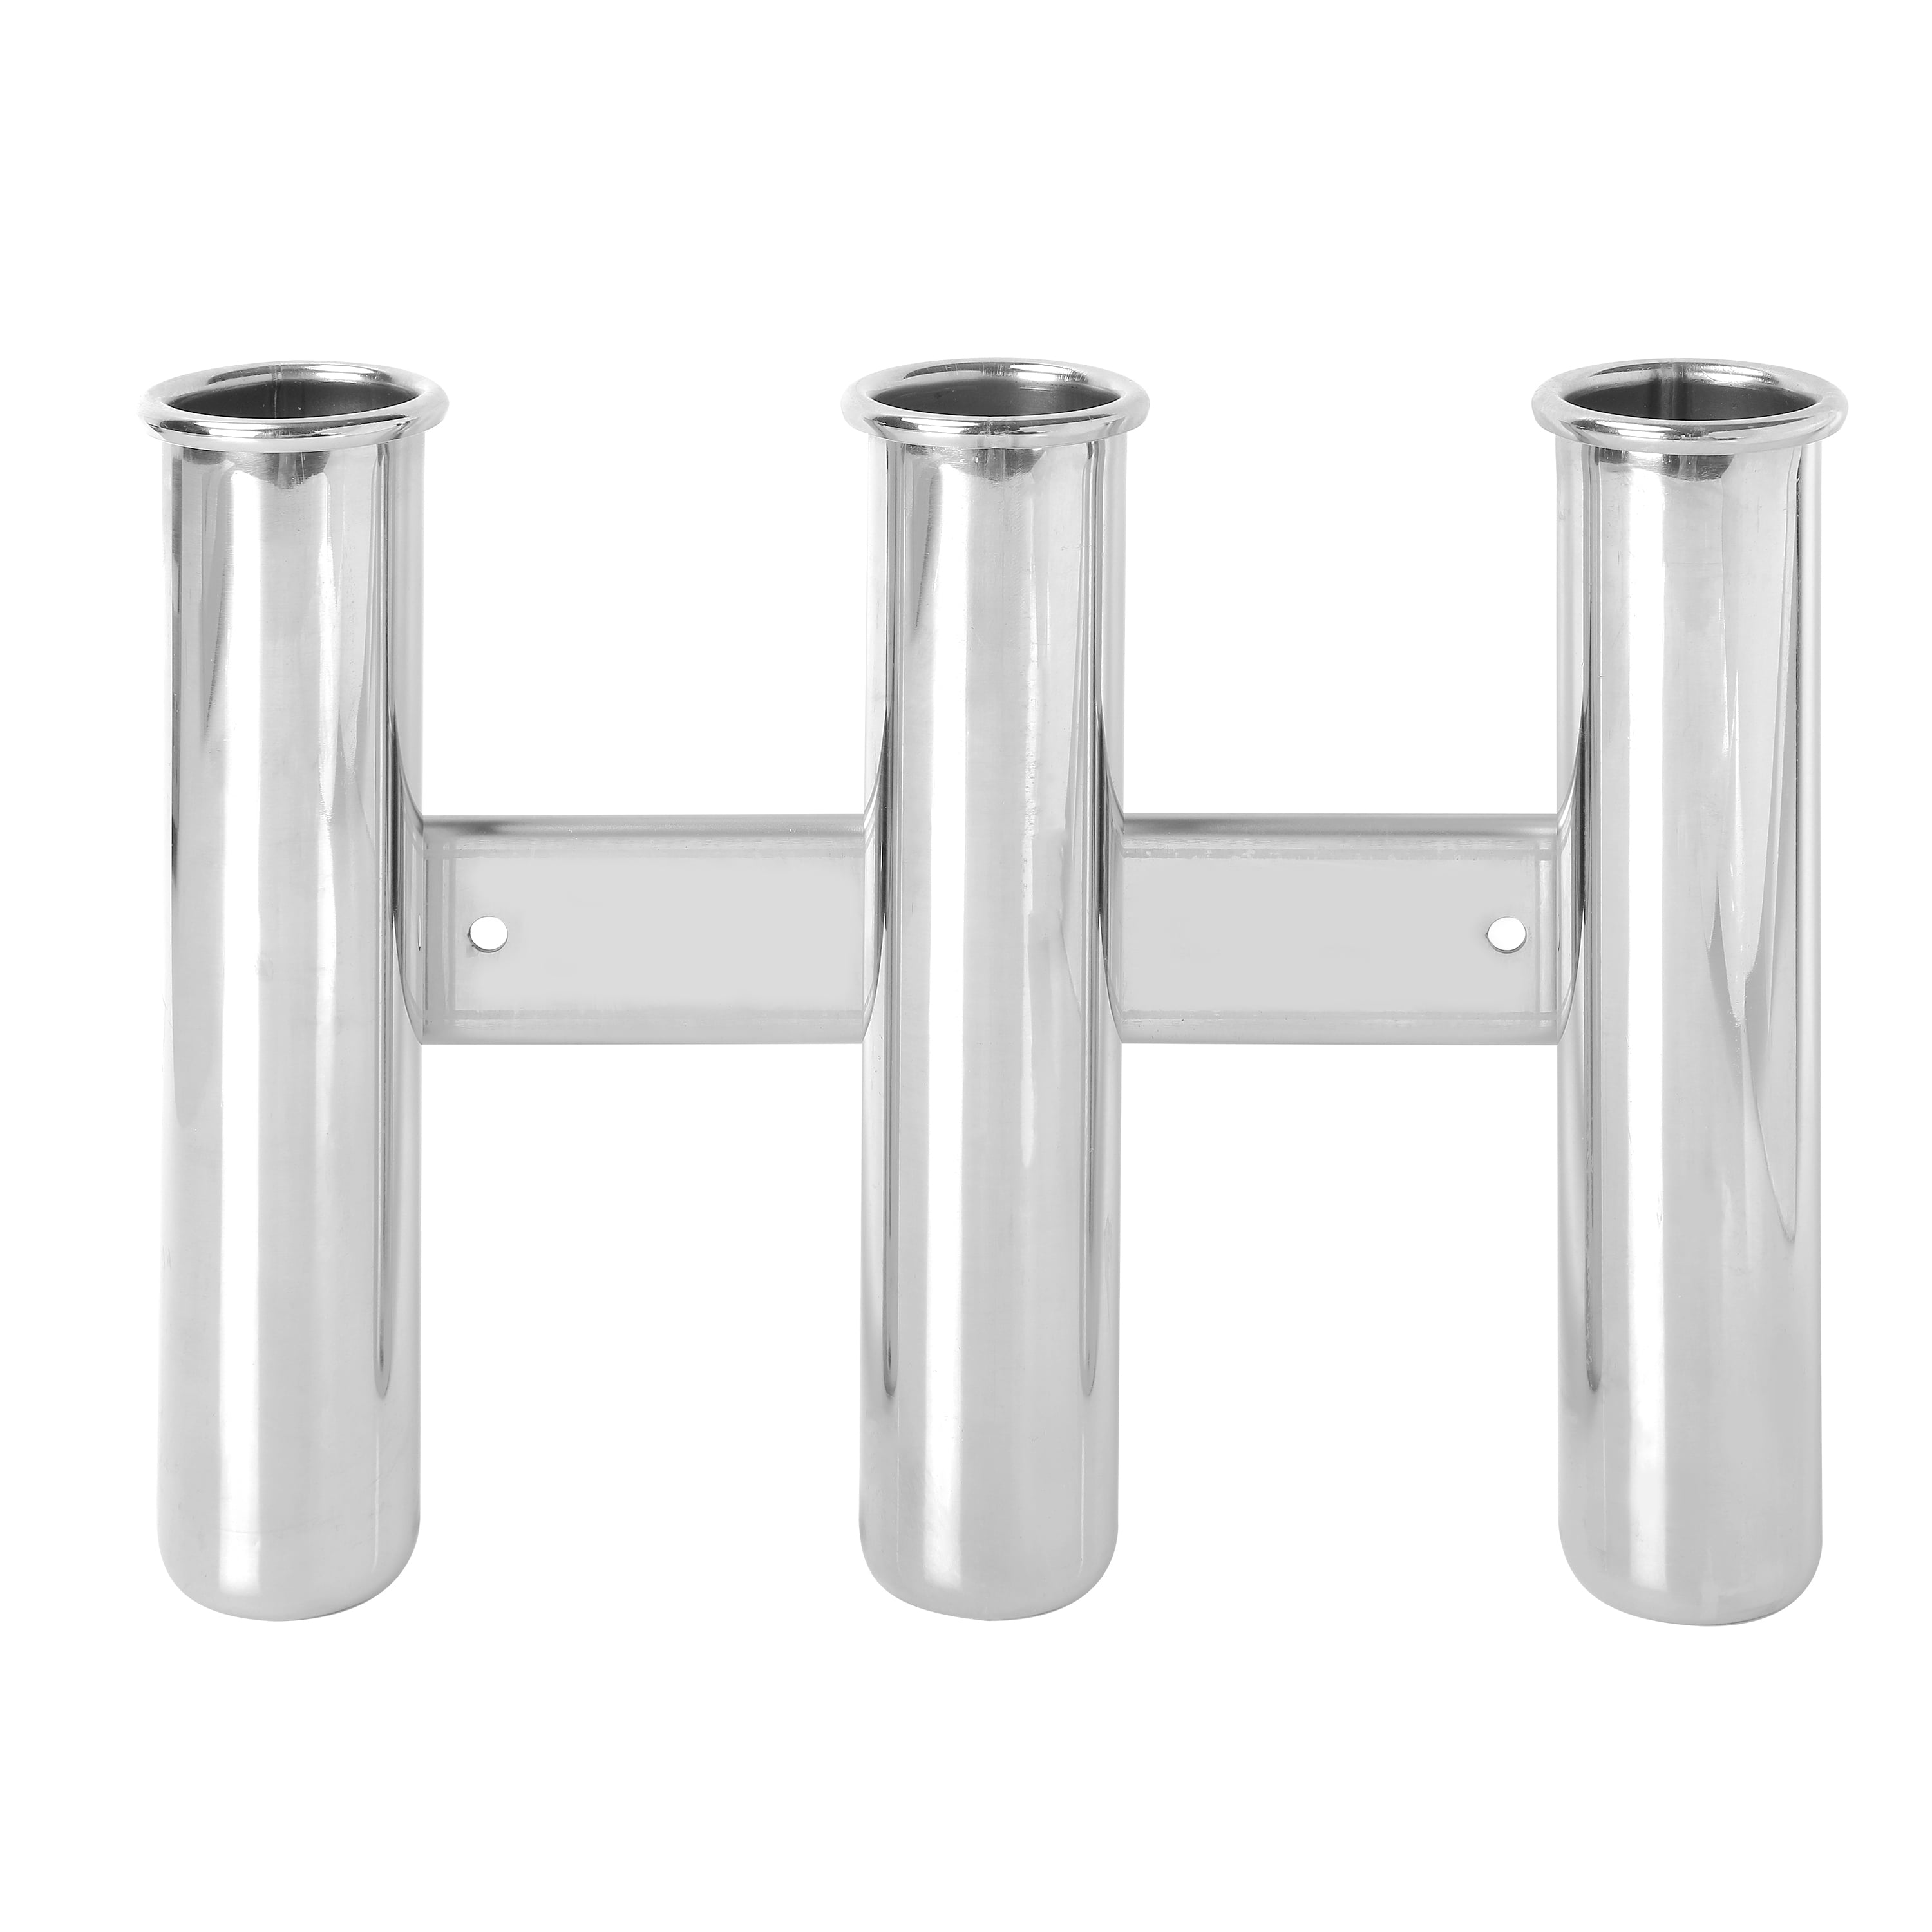 Wall Mounted Fishing Rod Holder for Boat, 316 Stainless Steel 4